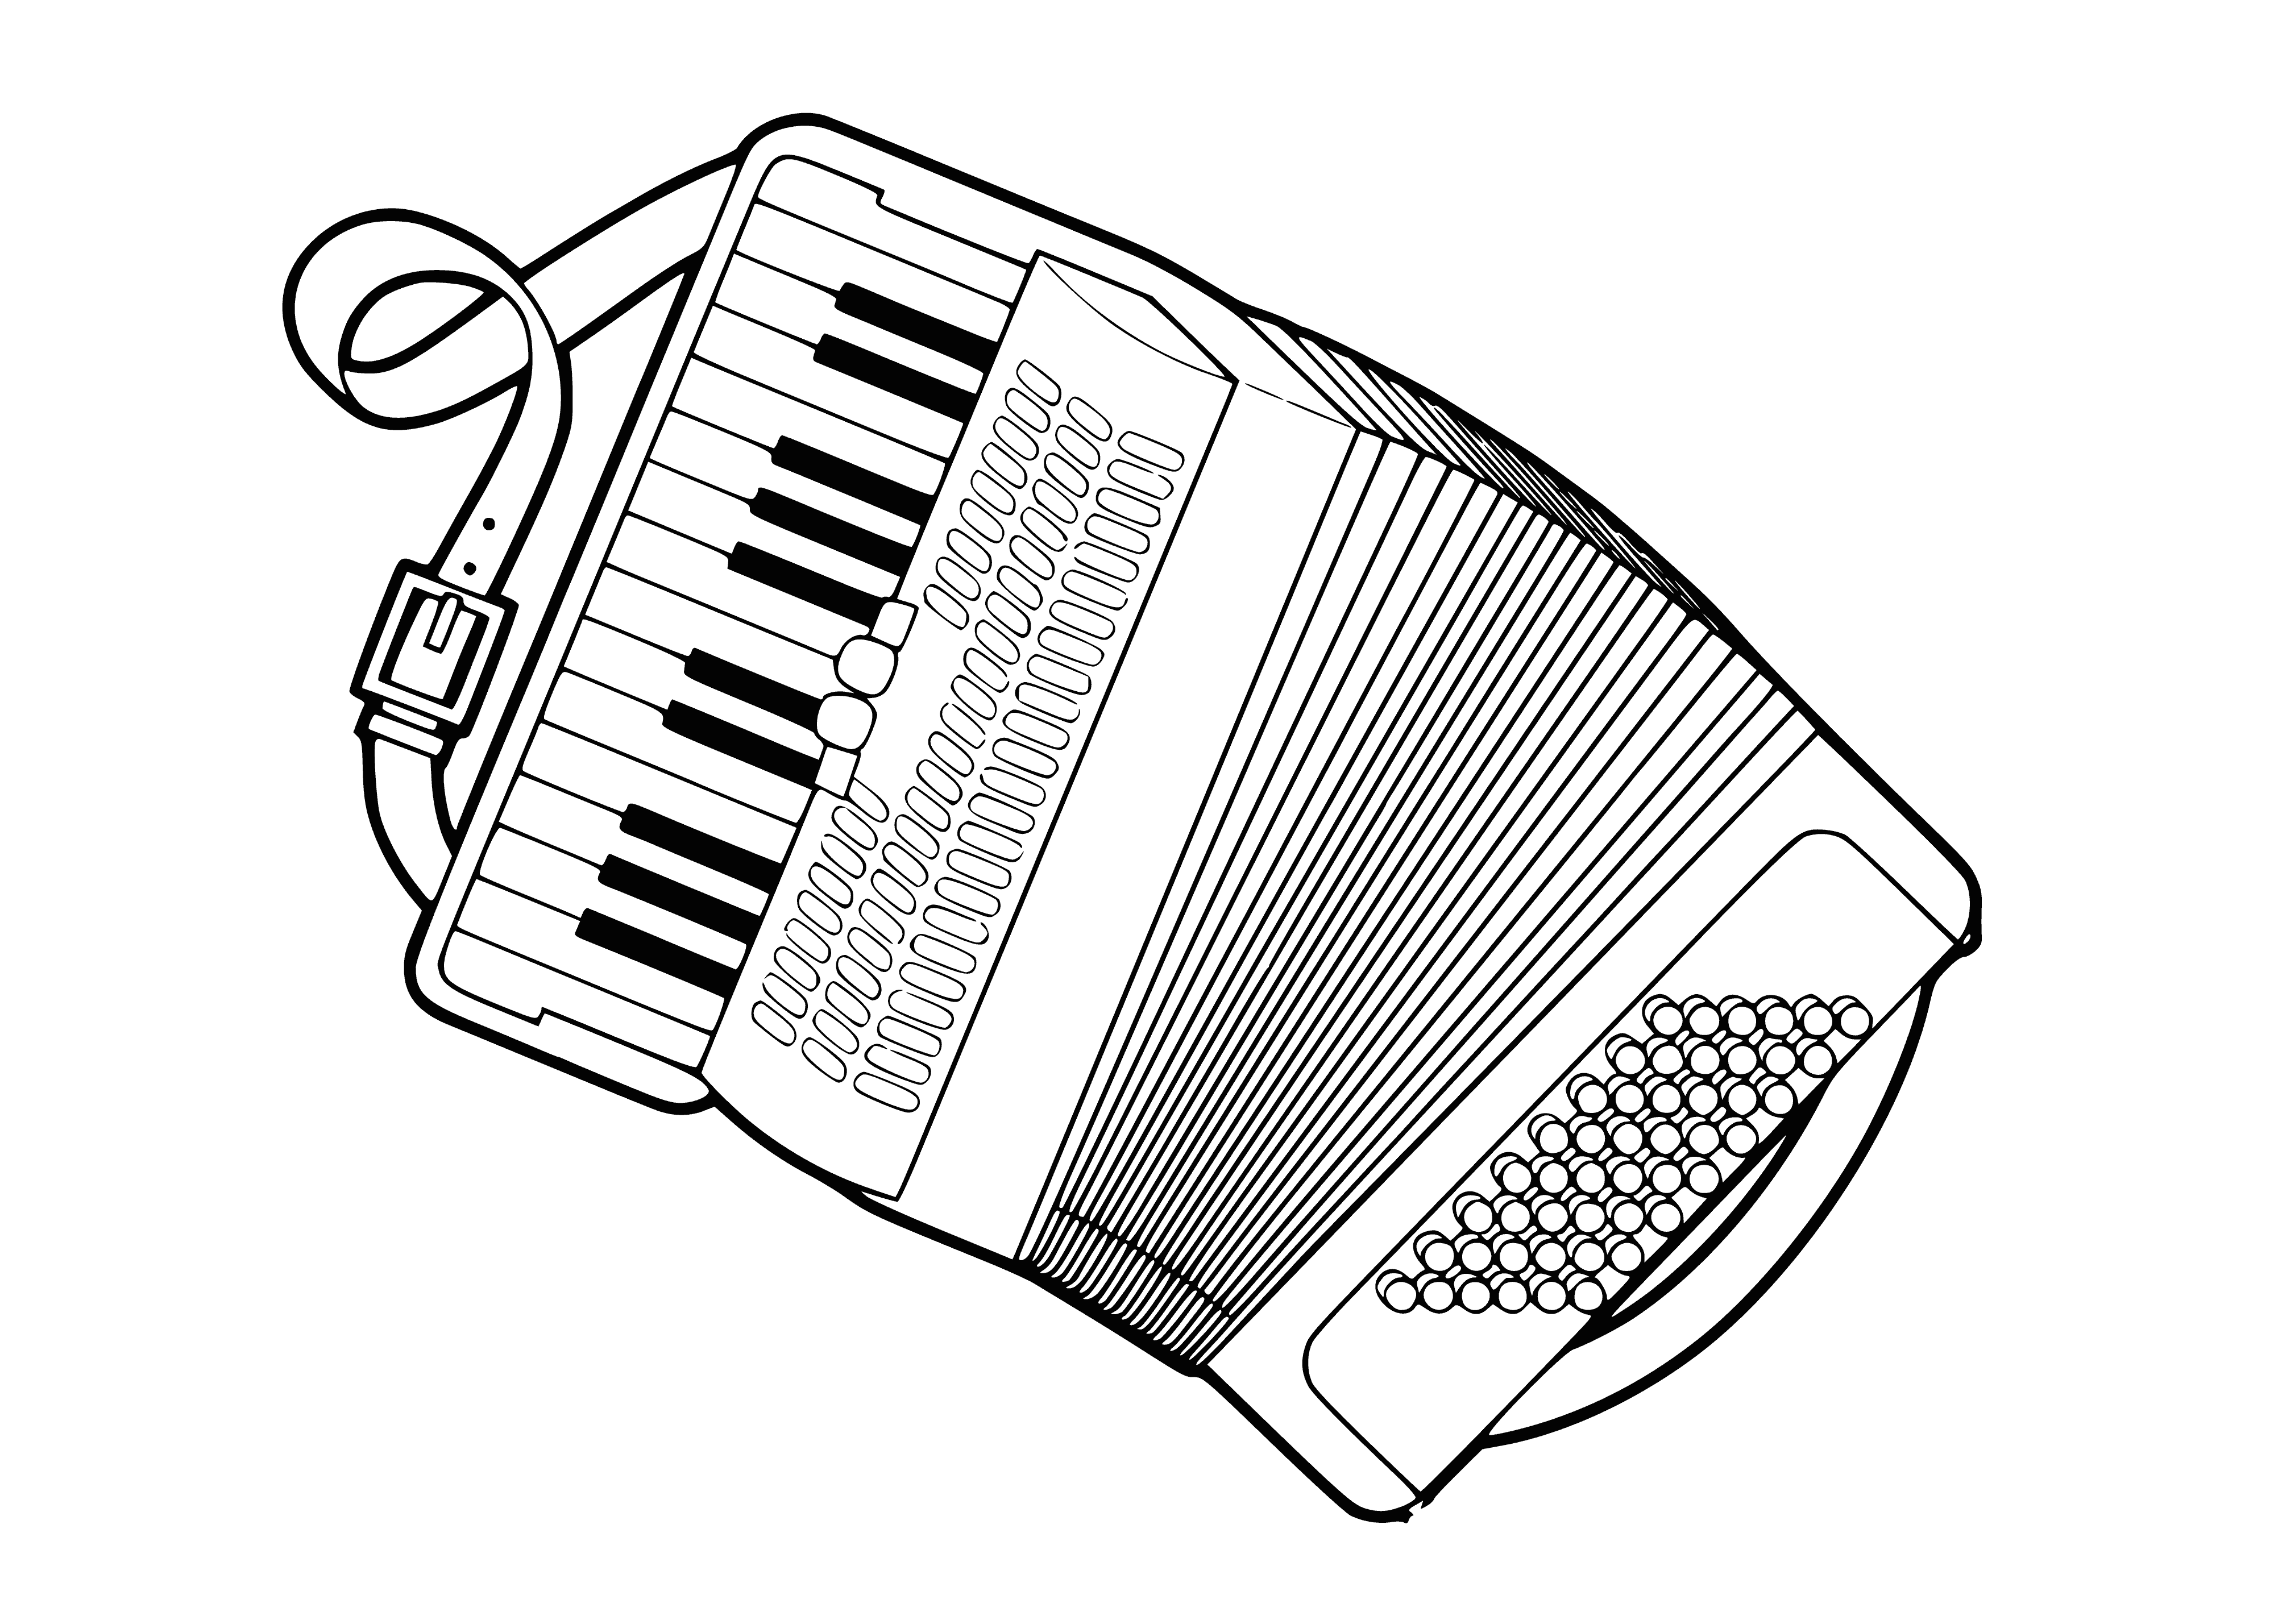 coloring page: A man playing an accordion in a park wearing a black hat & coat; the red & white accordion providing a colorful contrast.